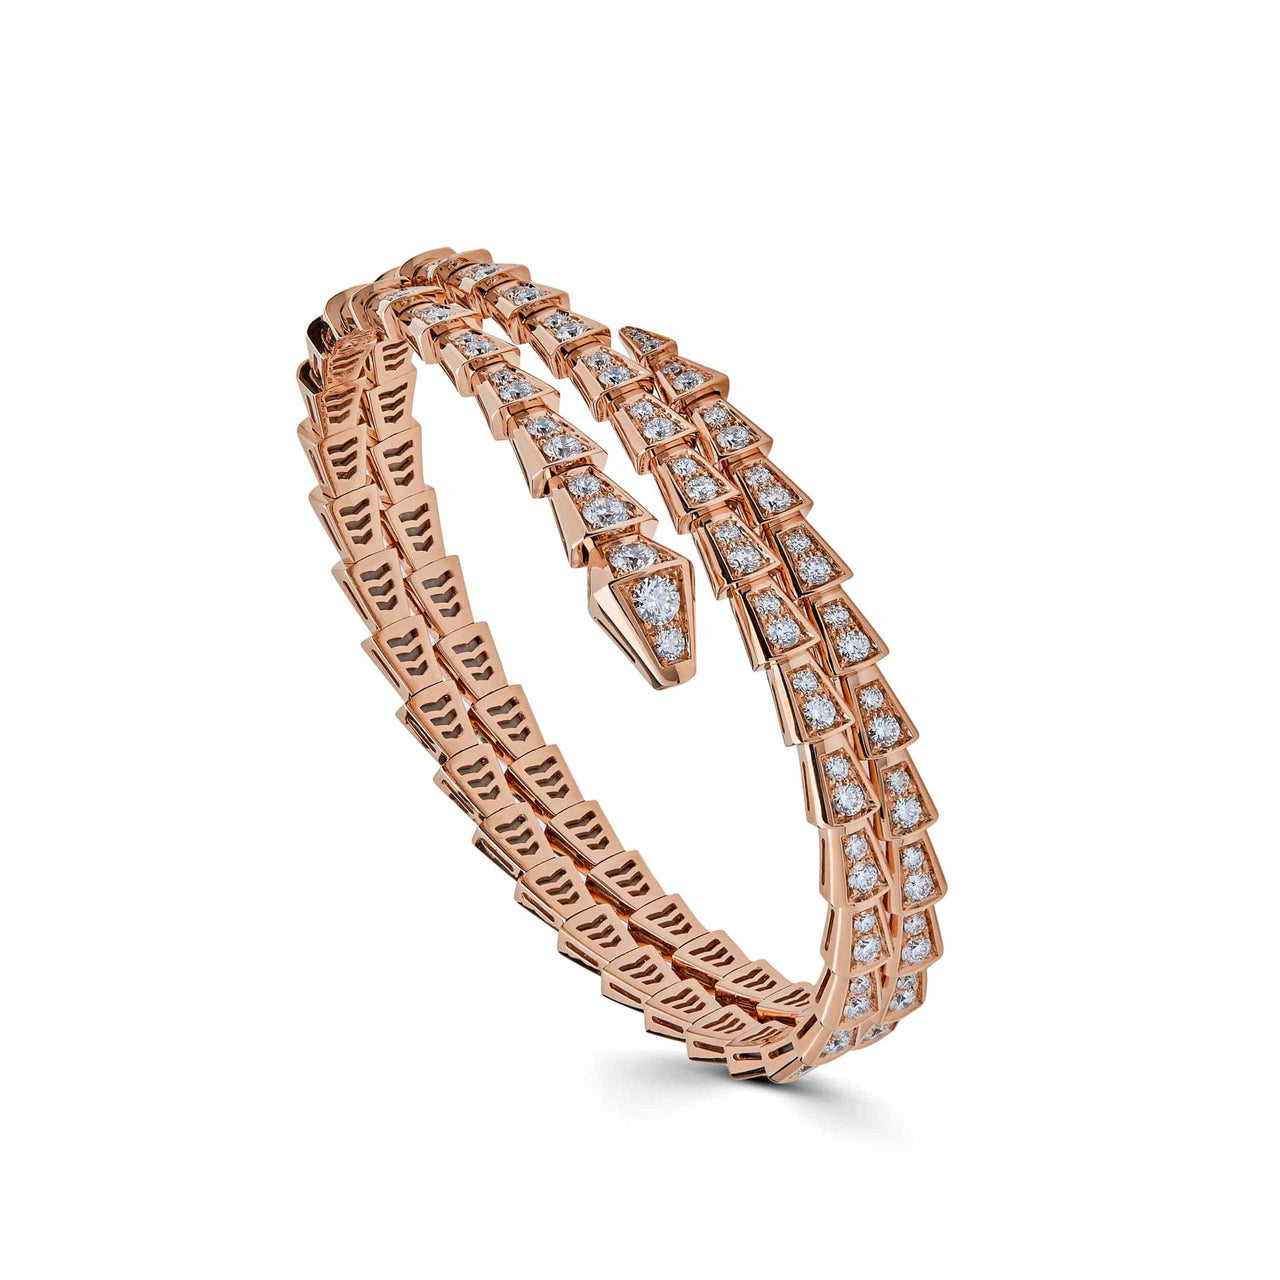 Buy Shimmer Divine Limited Edition AD Special Love Heart Magnificent 18K Rose  Gold Bracelet for Women/Girls (SMNSD-BNG-3168) at Amazon.in